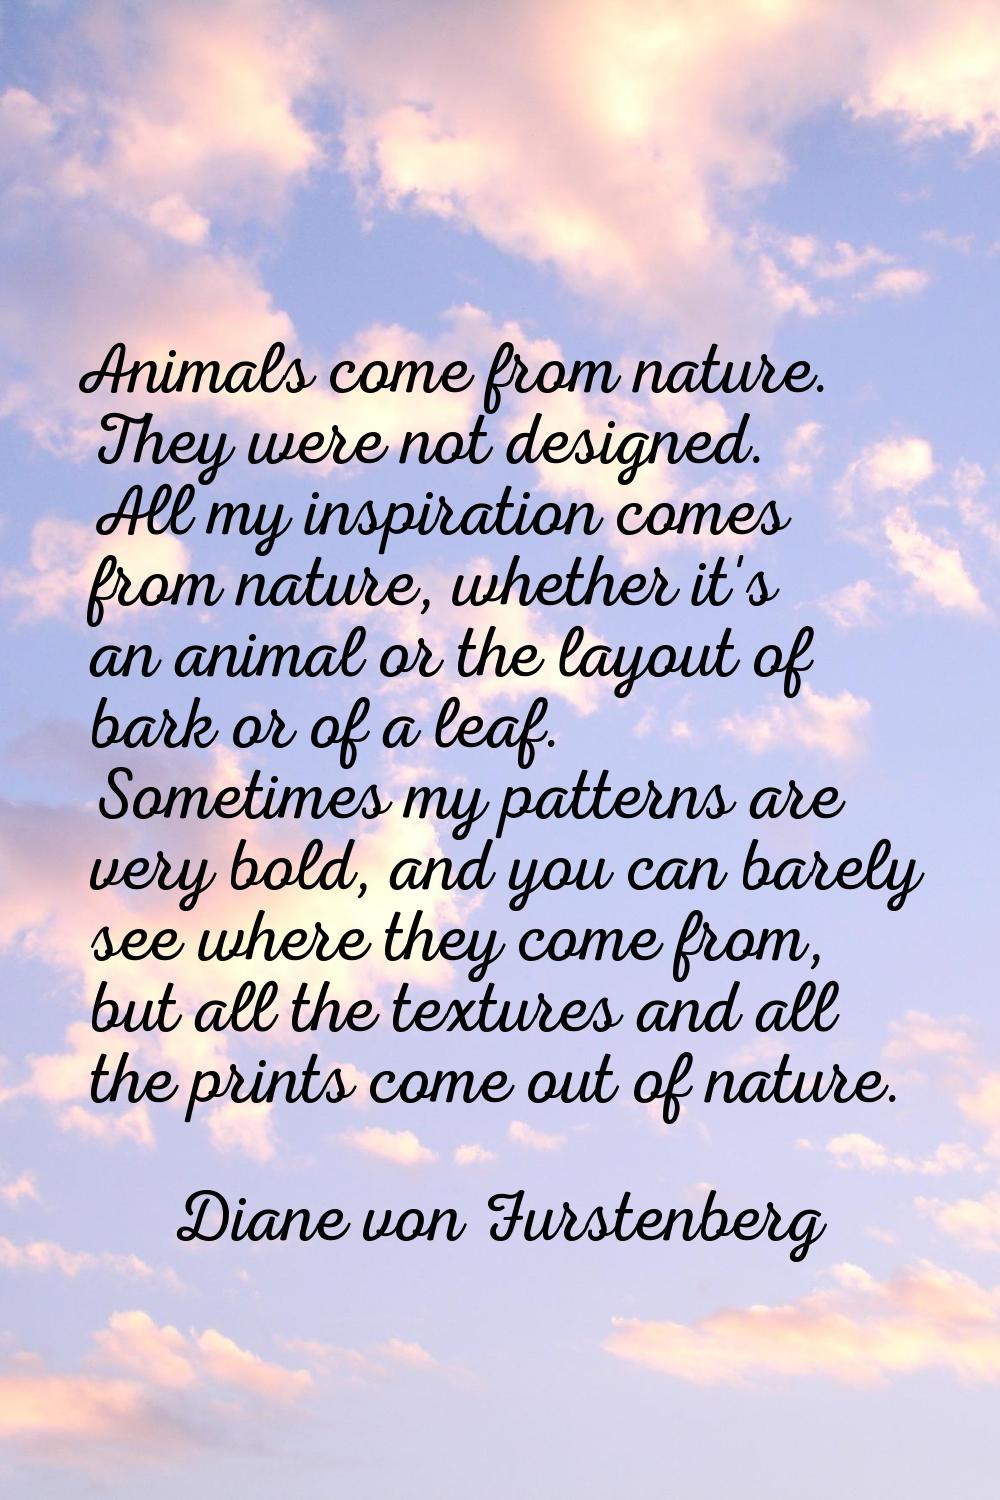 Animals come from nature. They were not designed. All my inspiration comes from nature, whether it'